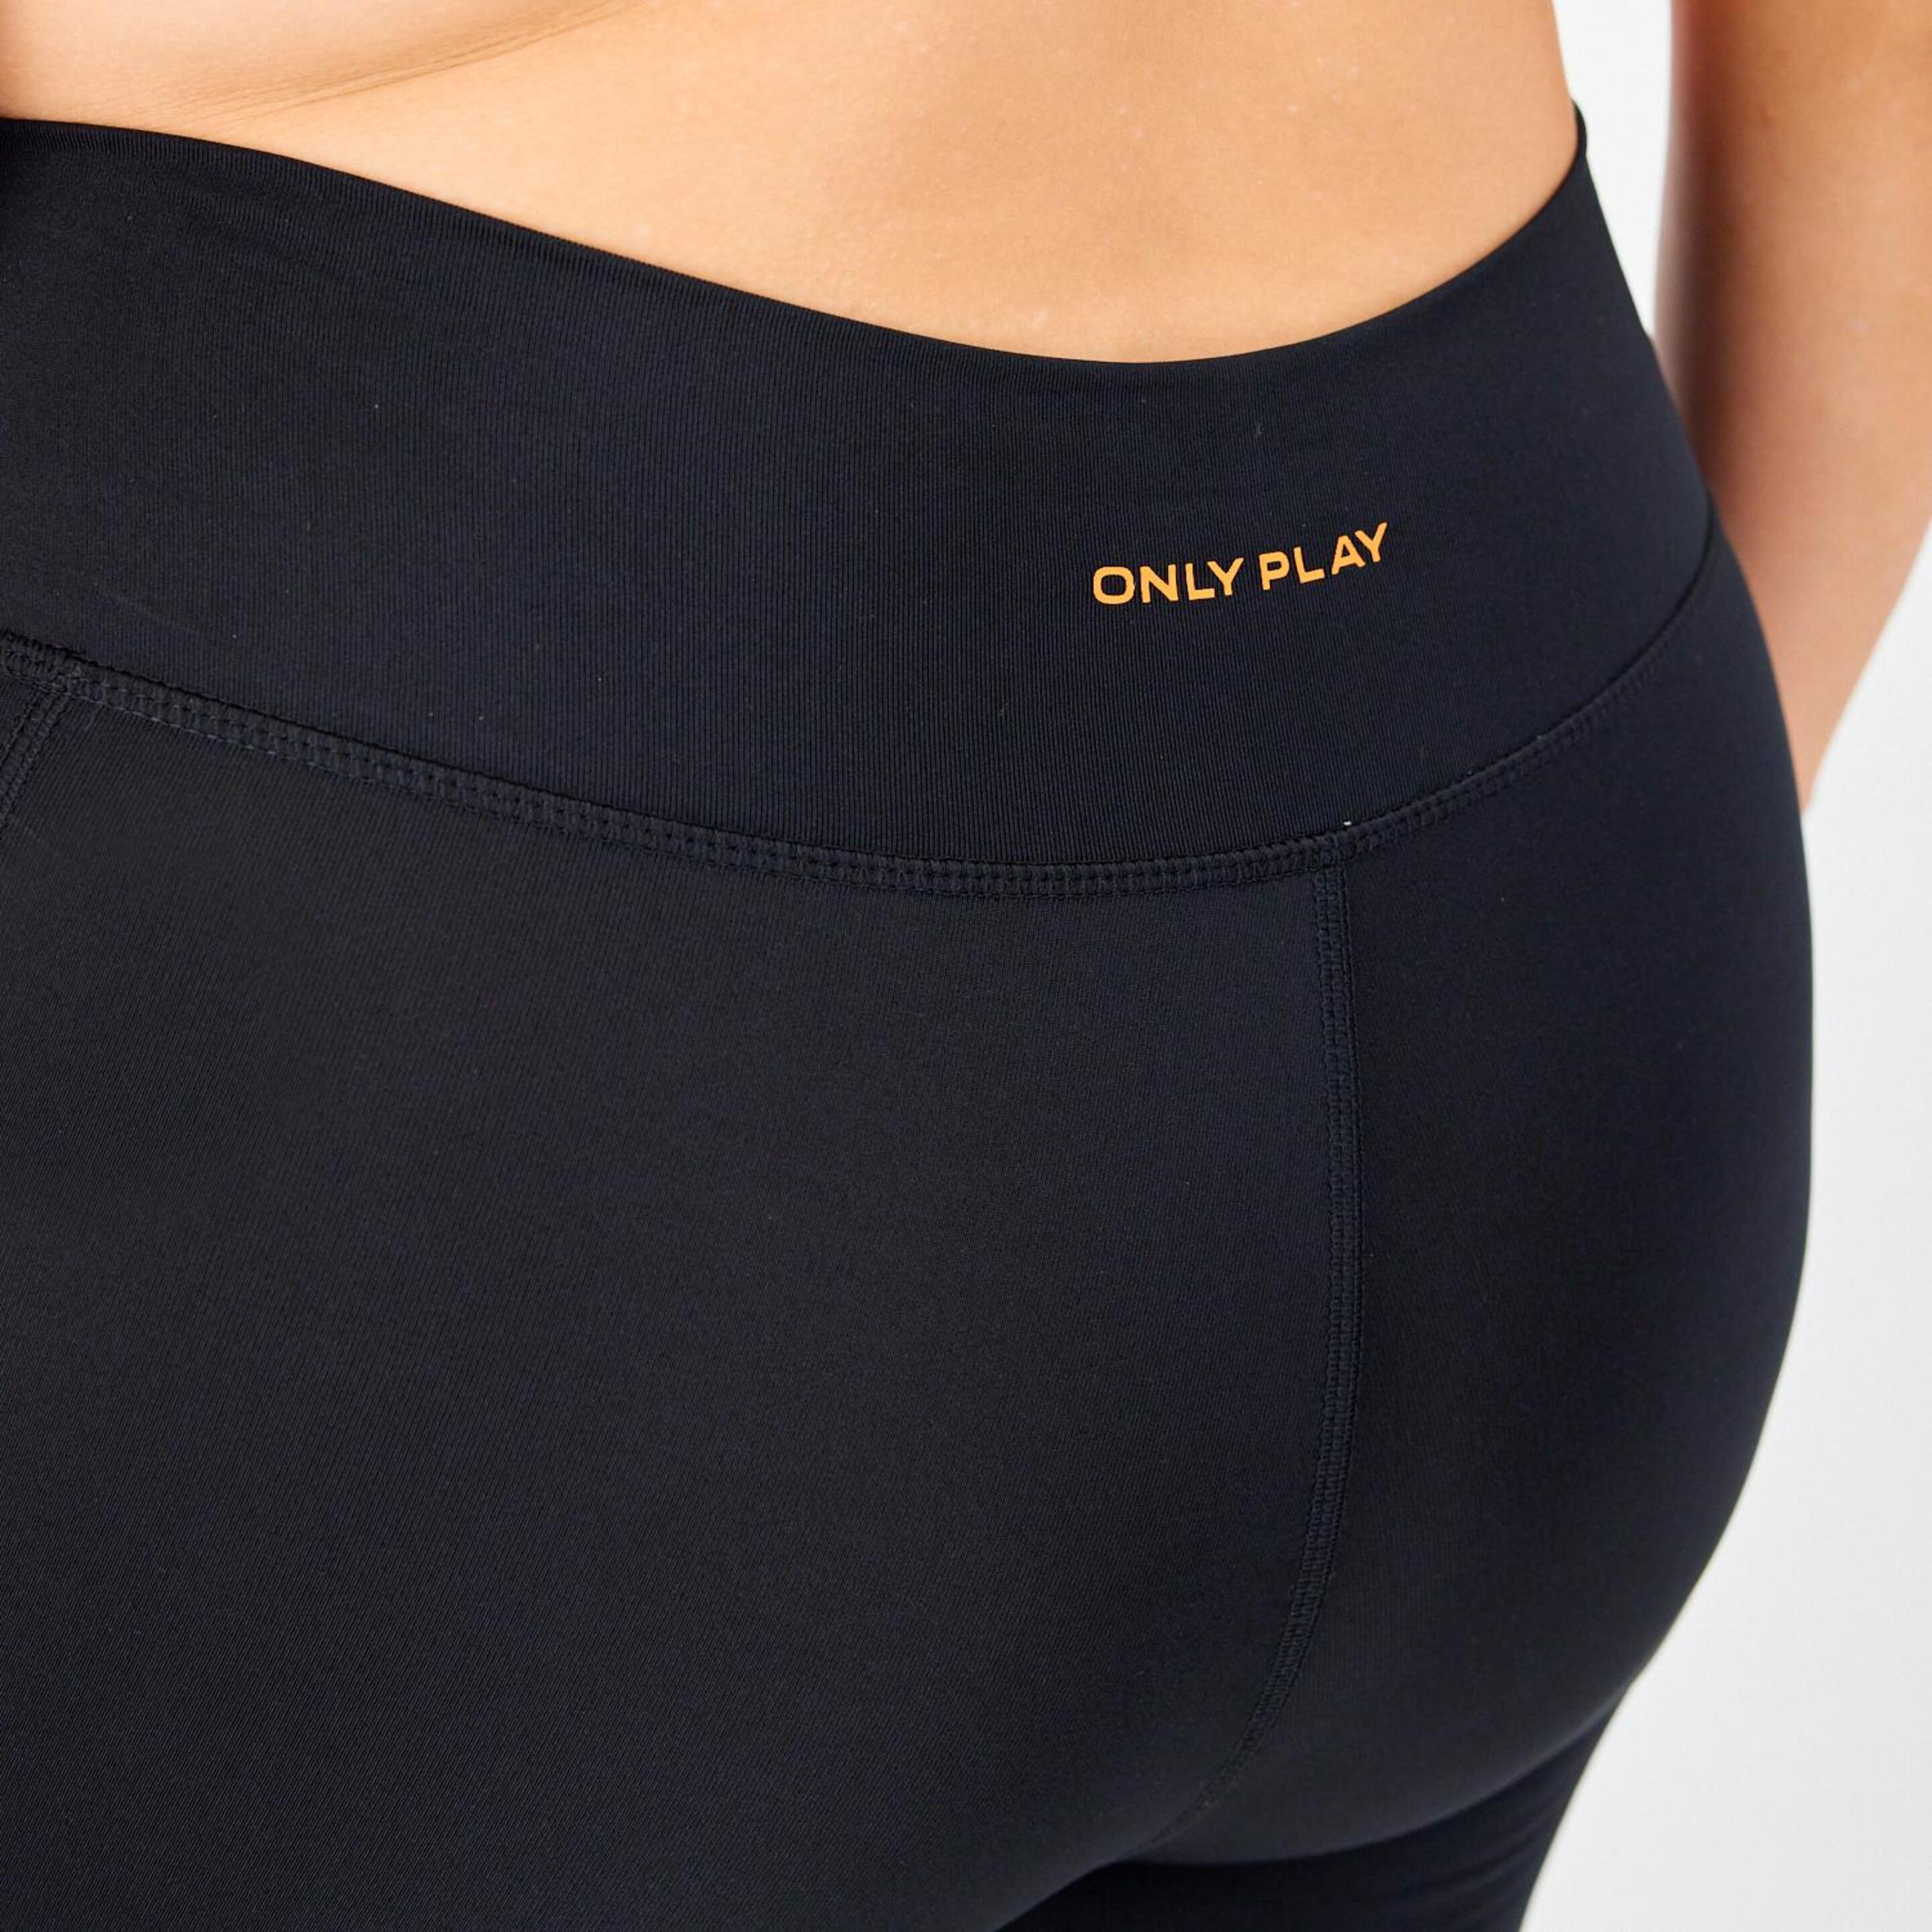 Only Play Jam-Sweet - Sweet - Leggings Ginásio Mulher | Sport Zone